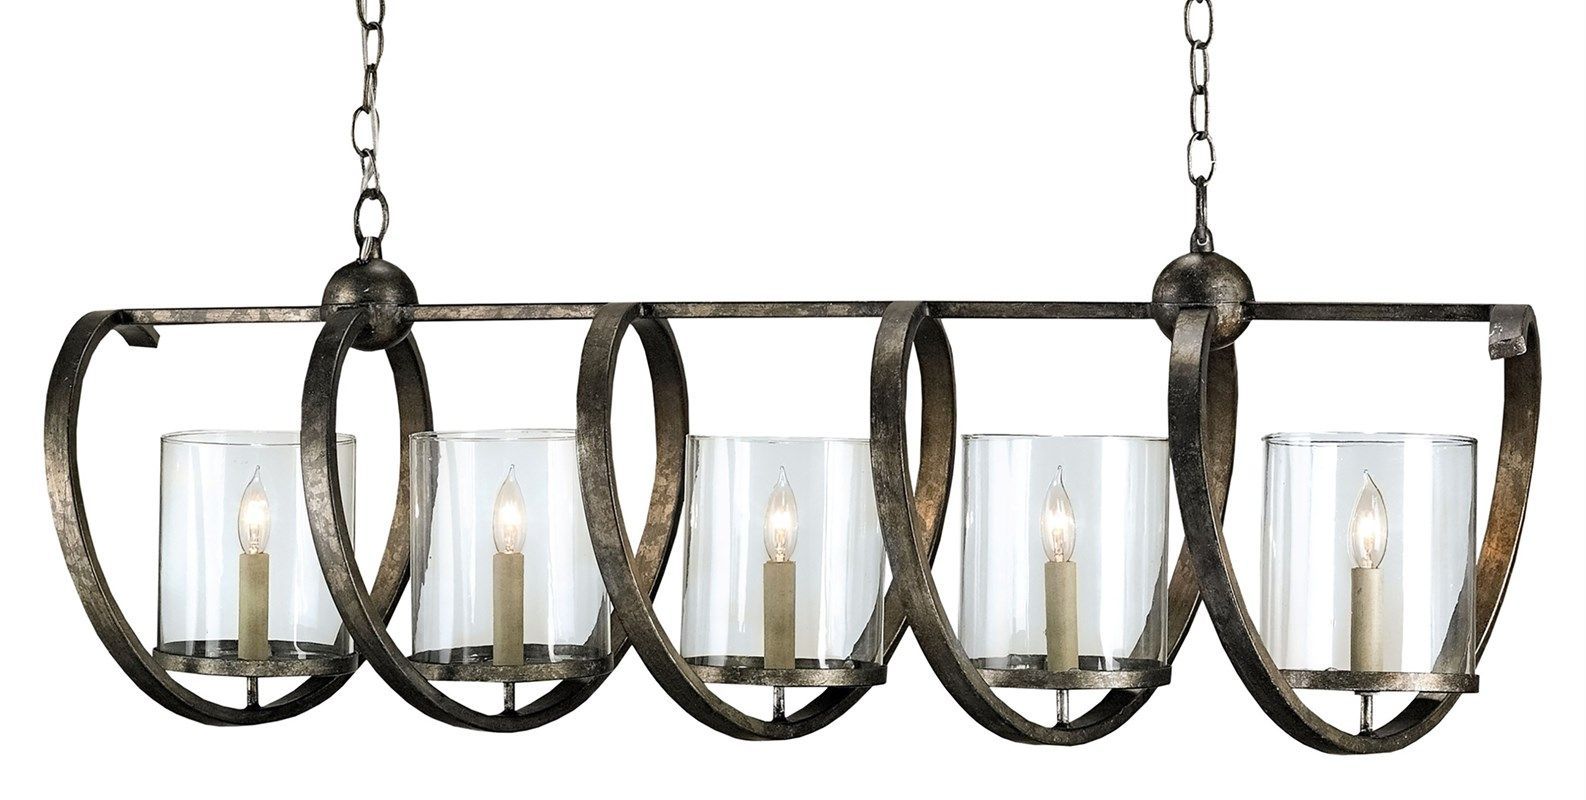 Chandelier MAXIMUS by Currey & Company